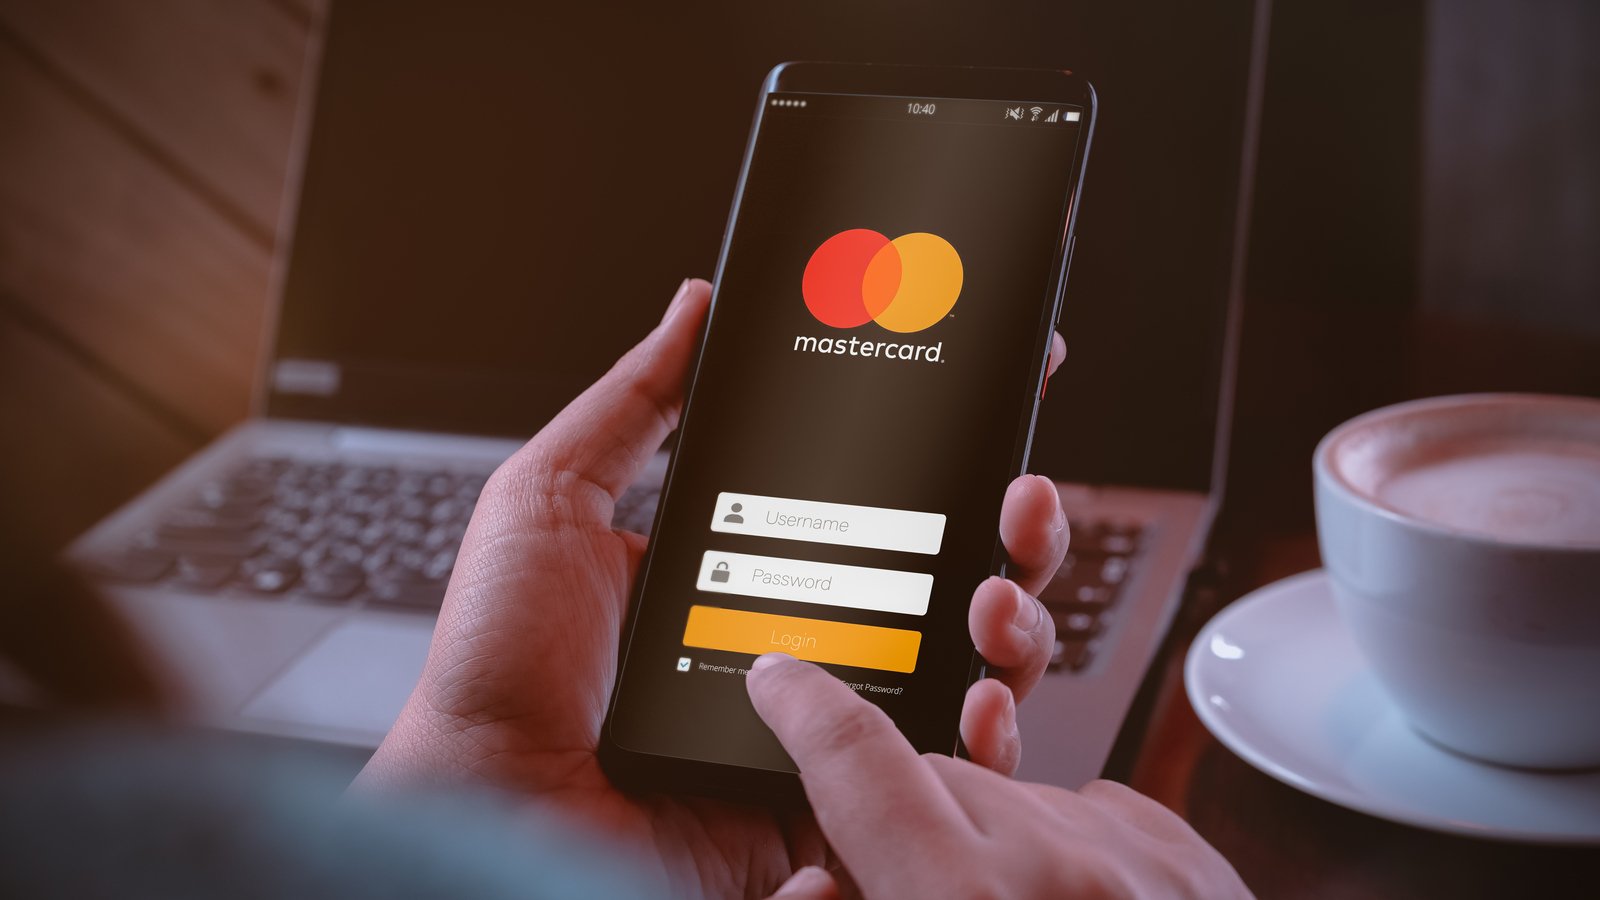 Mastercard’s ‘Crypto Credential’ Goes Live to Simplify Sending Bitcoin